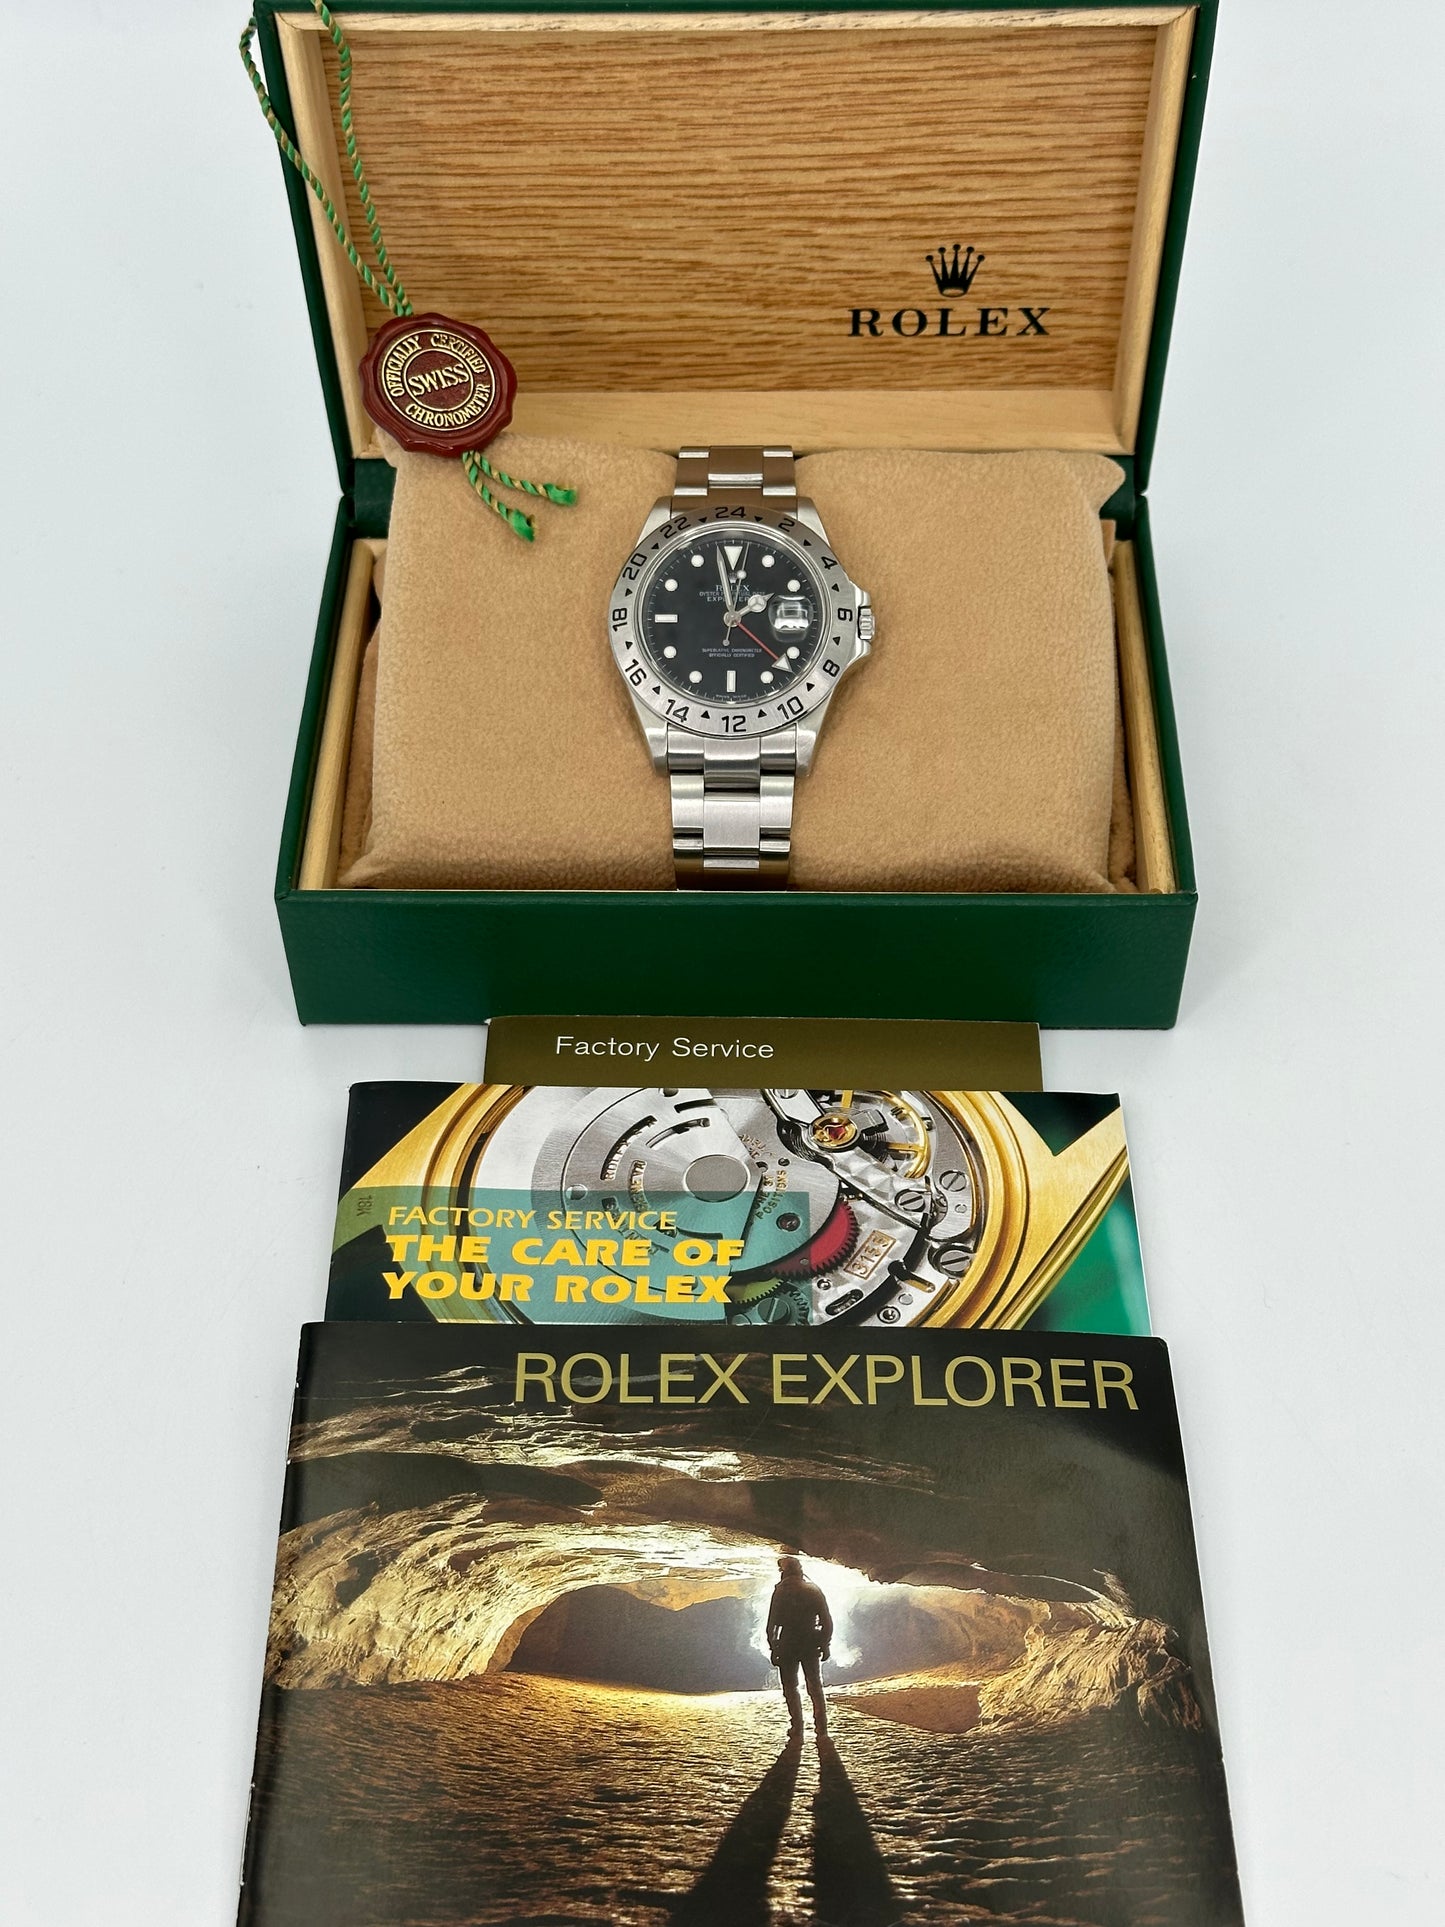 2002 Rolex Explorer II 40mm 16570 Stainless Steel Black Dial - MyWatchLLC